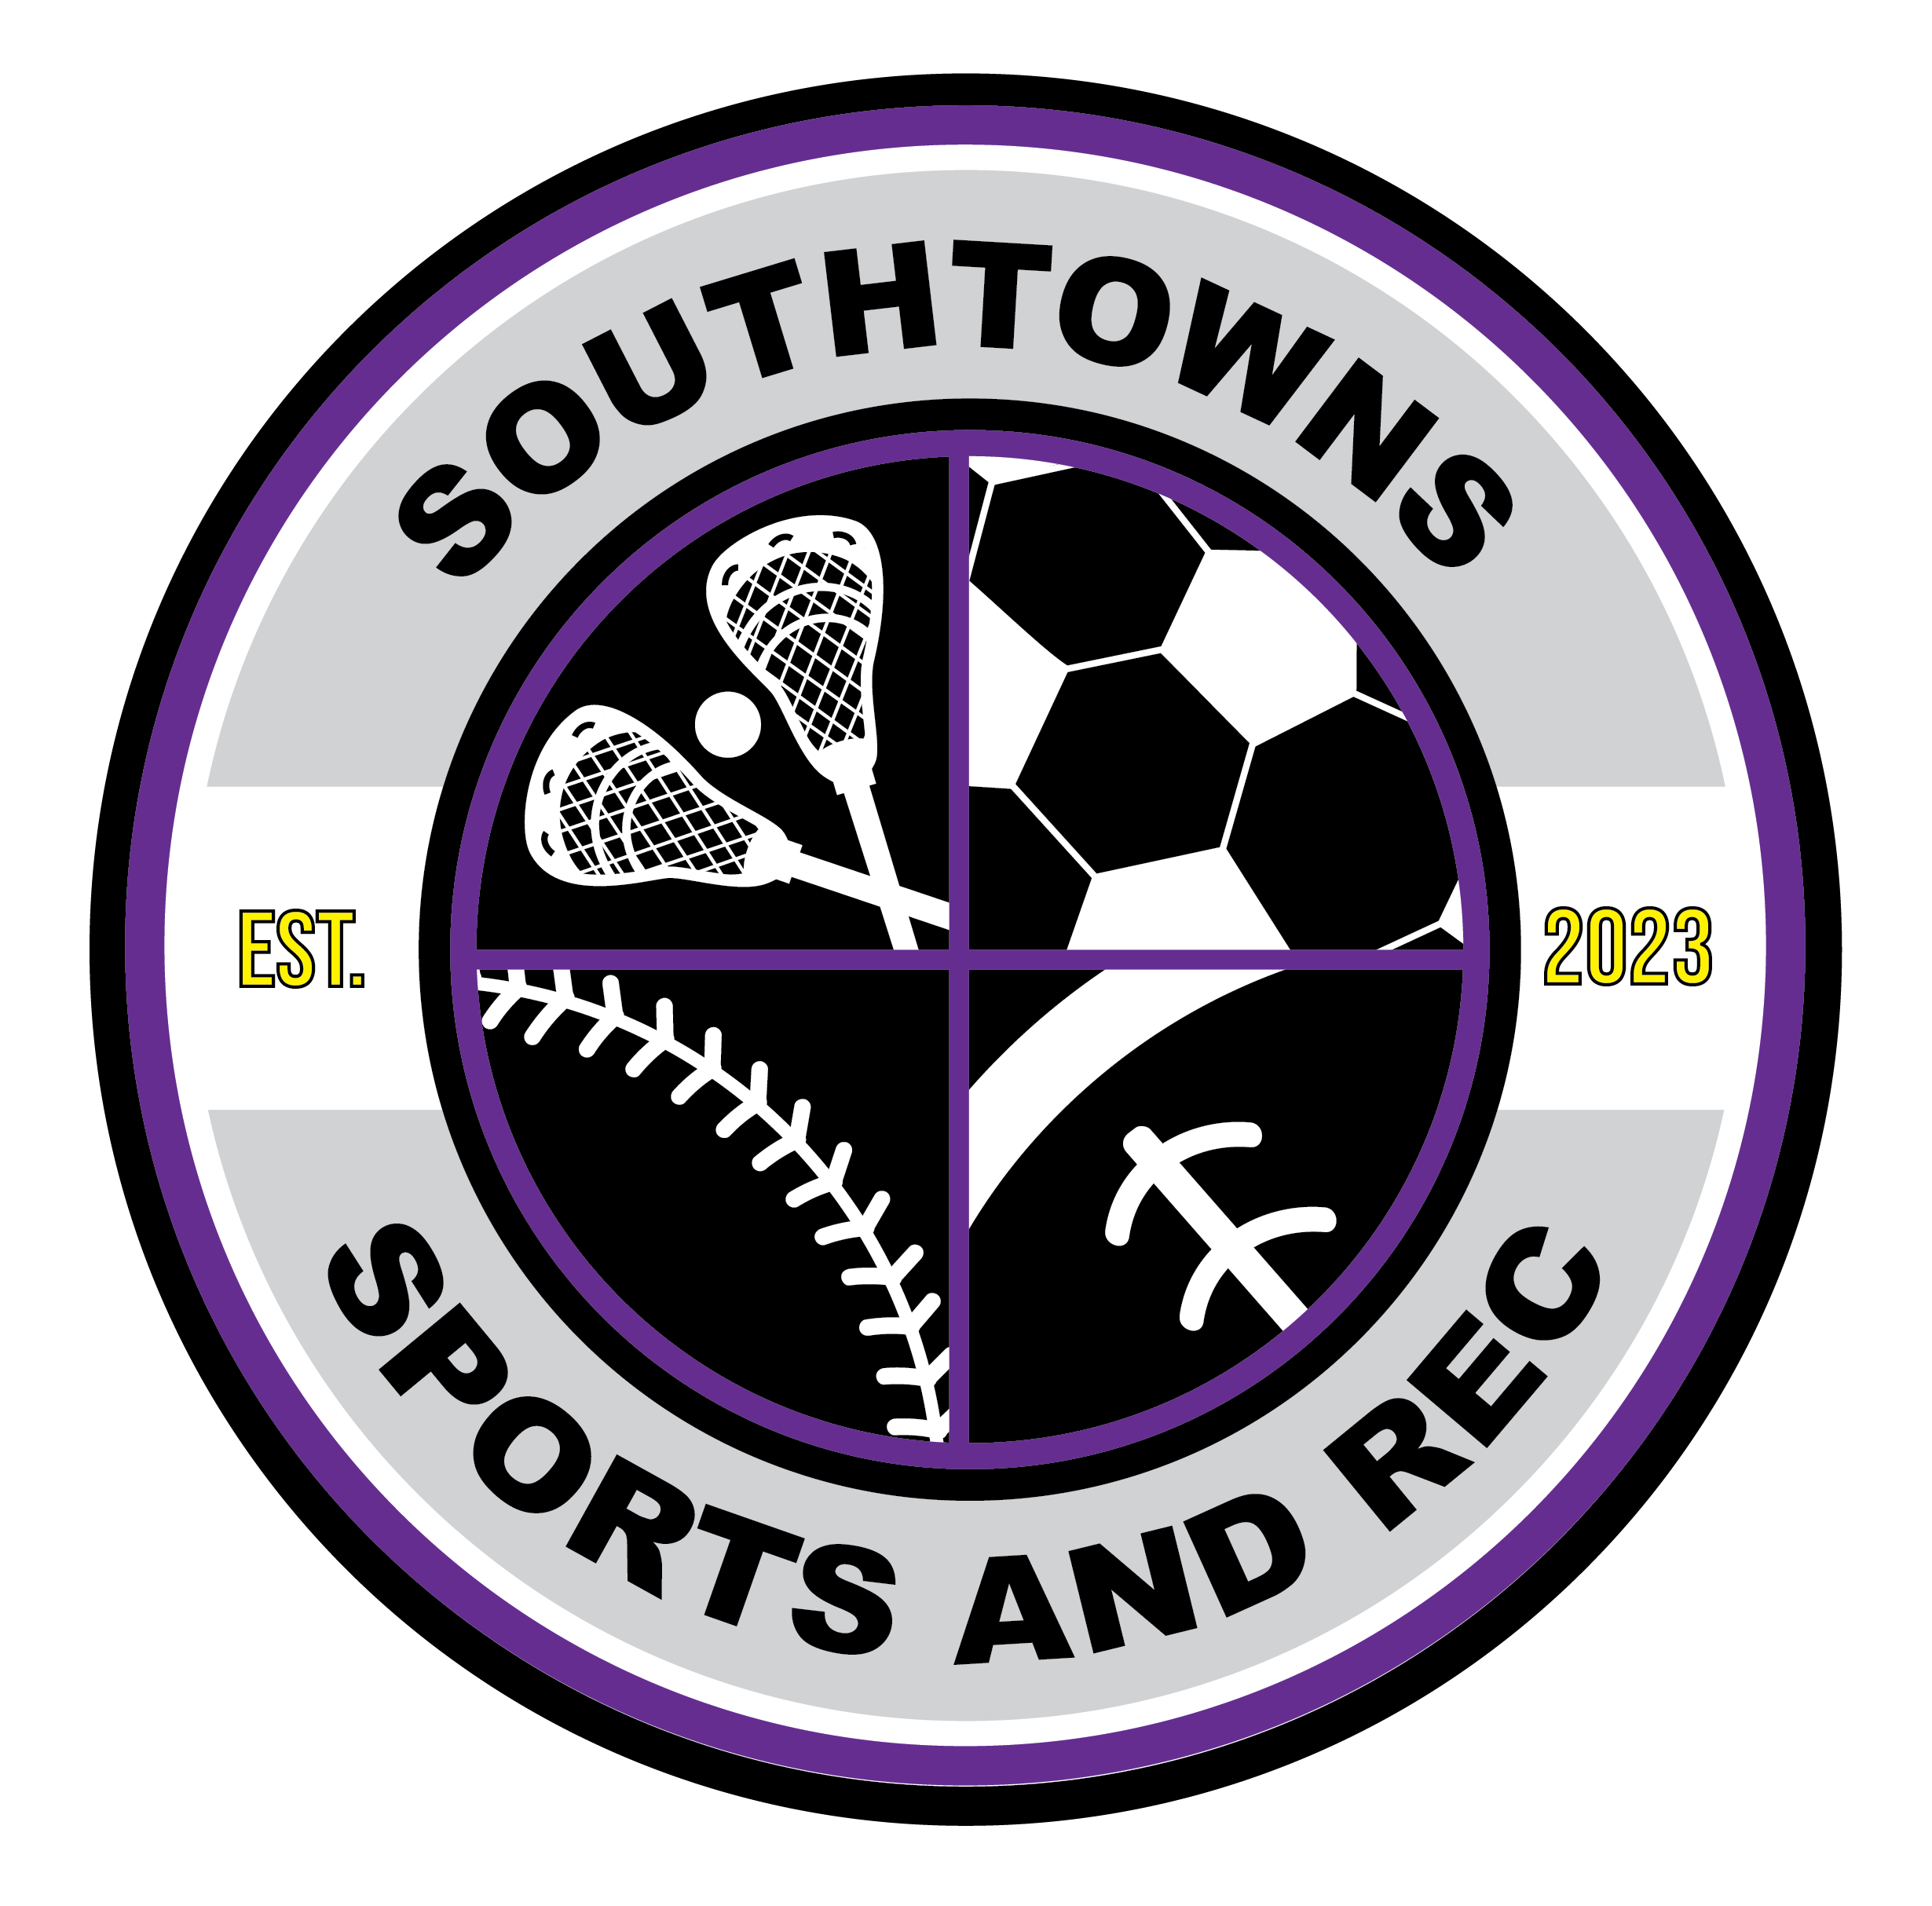 Southtowns Sports and Recreation